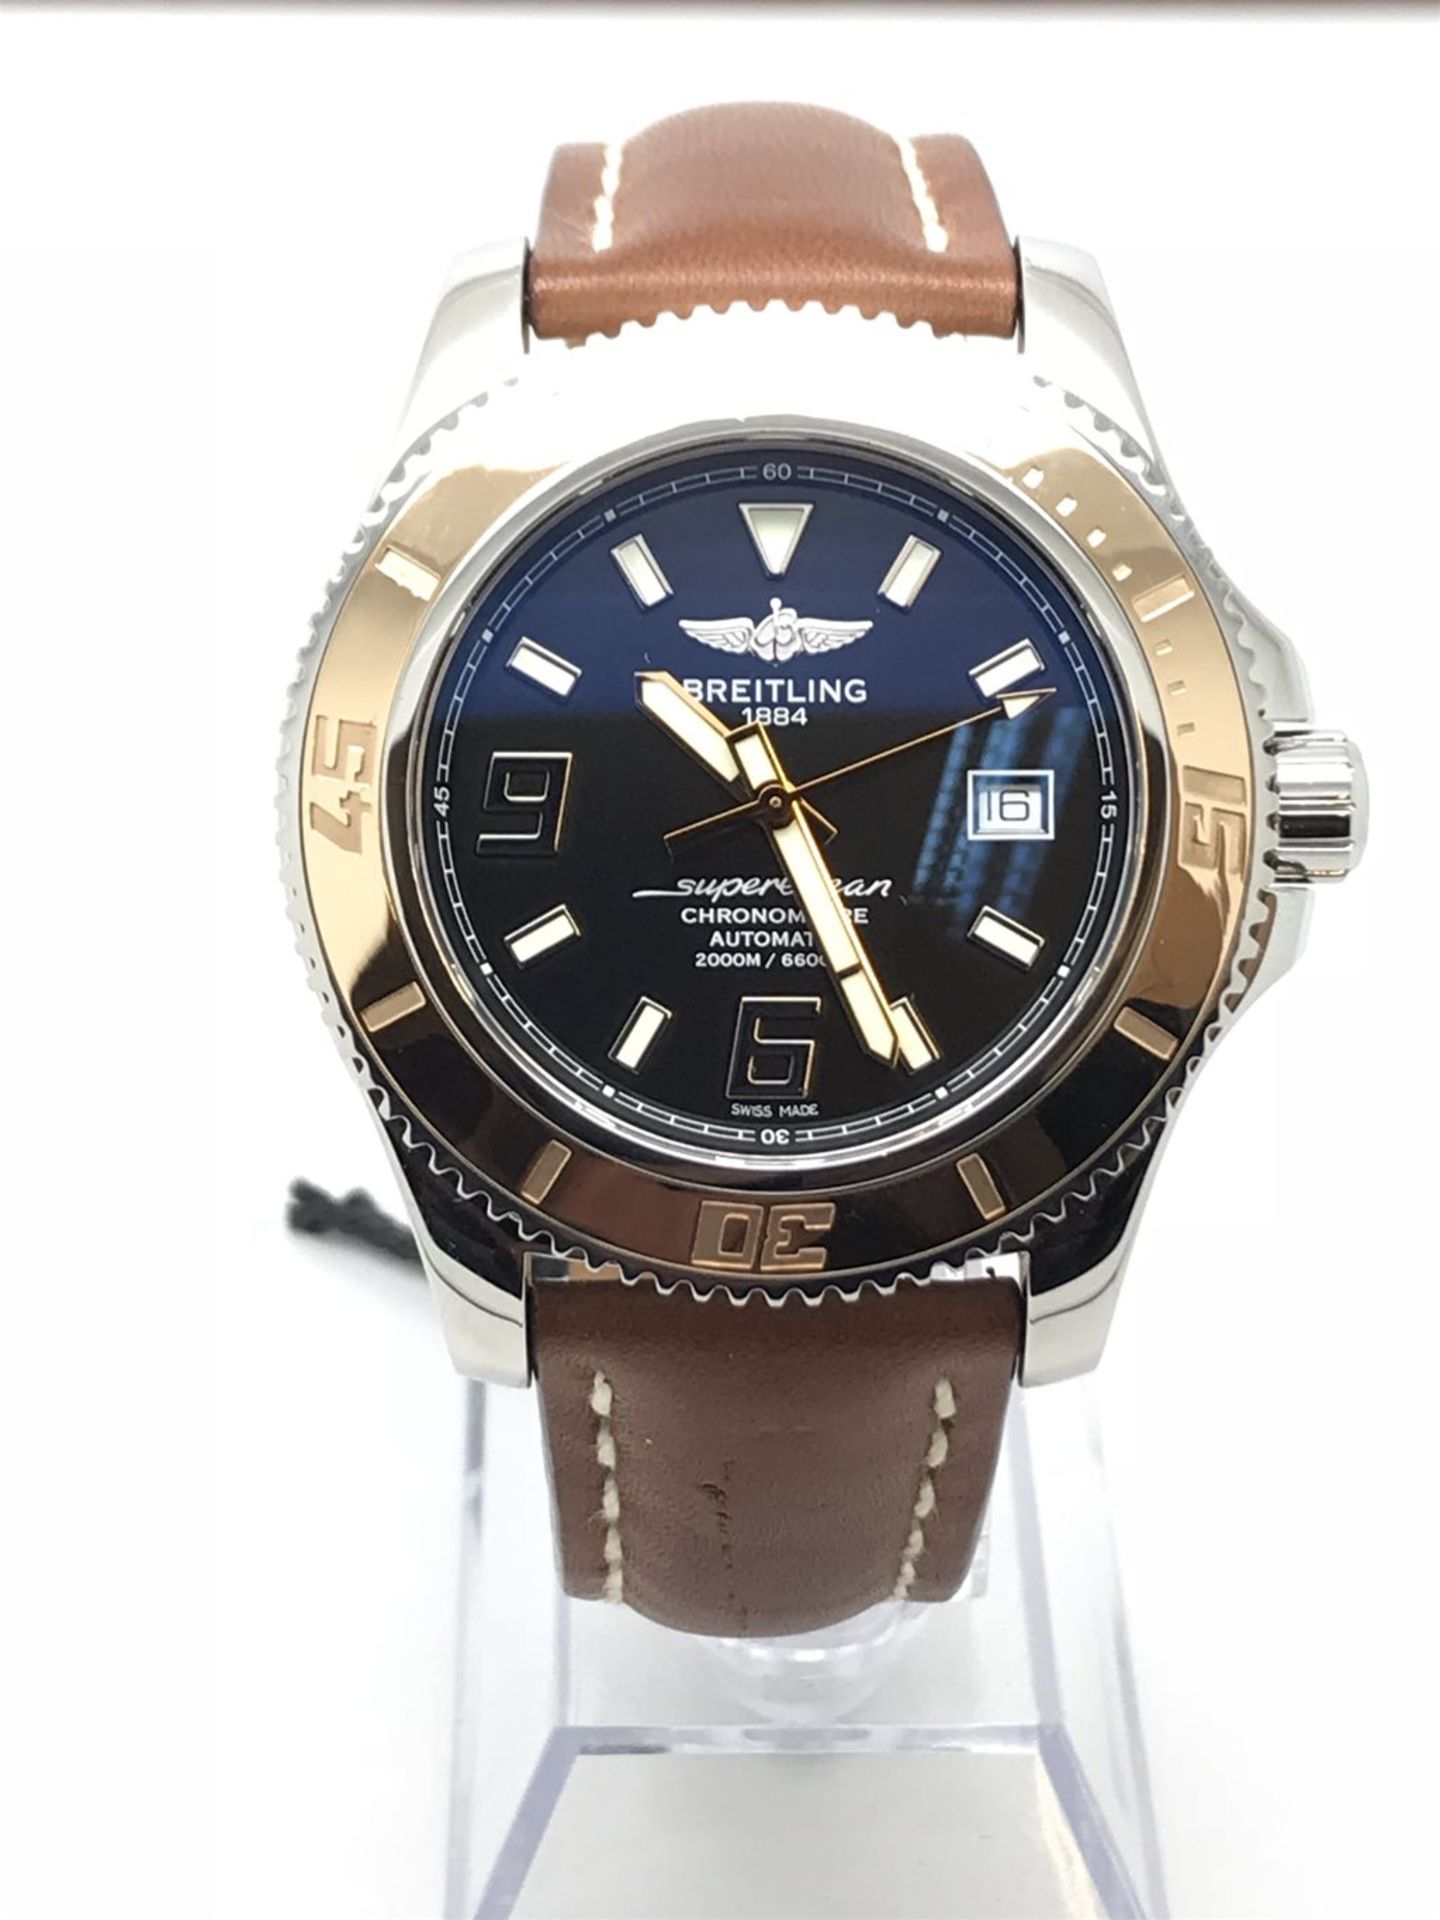 BREITLING Superocean 44 C17391, 2015 - Box & Papers - Image 2 of 5